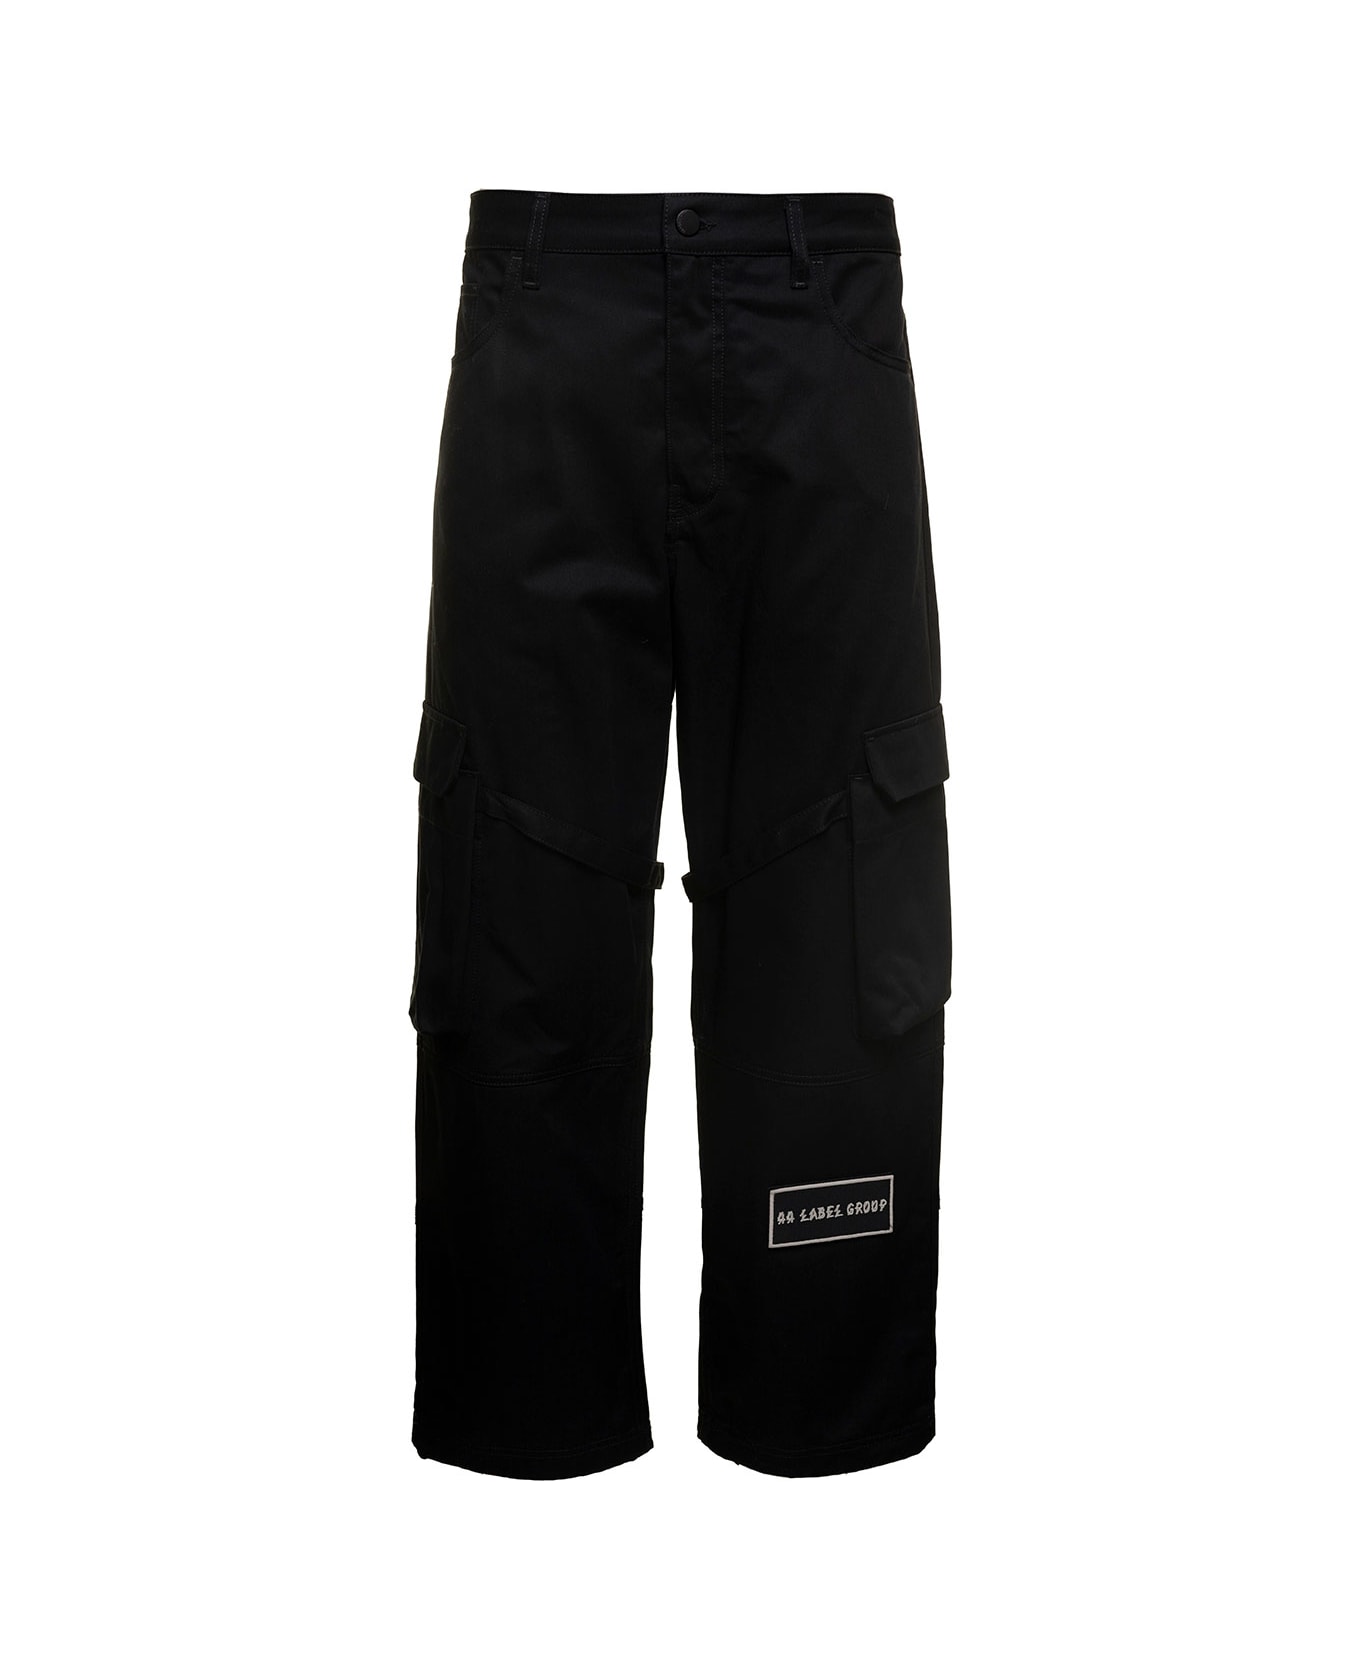 44 Label Group 'helm' Black Cargo Pants With Logo Patch In Cotton Man - Black ボトムス